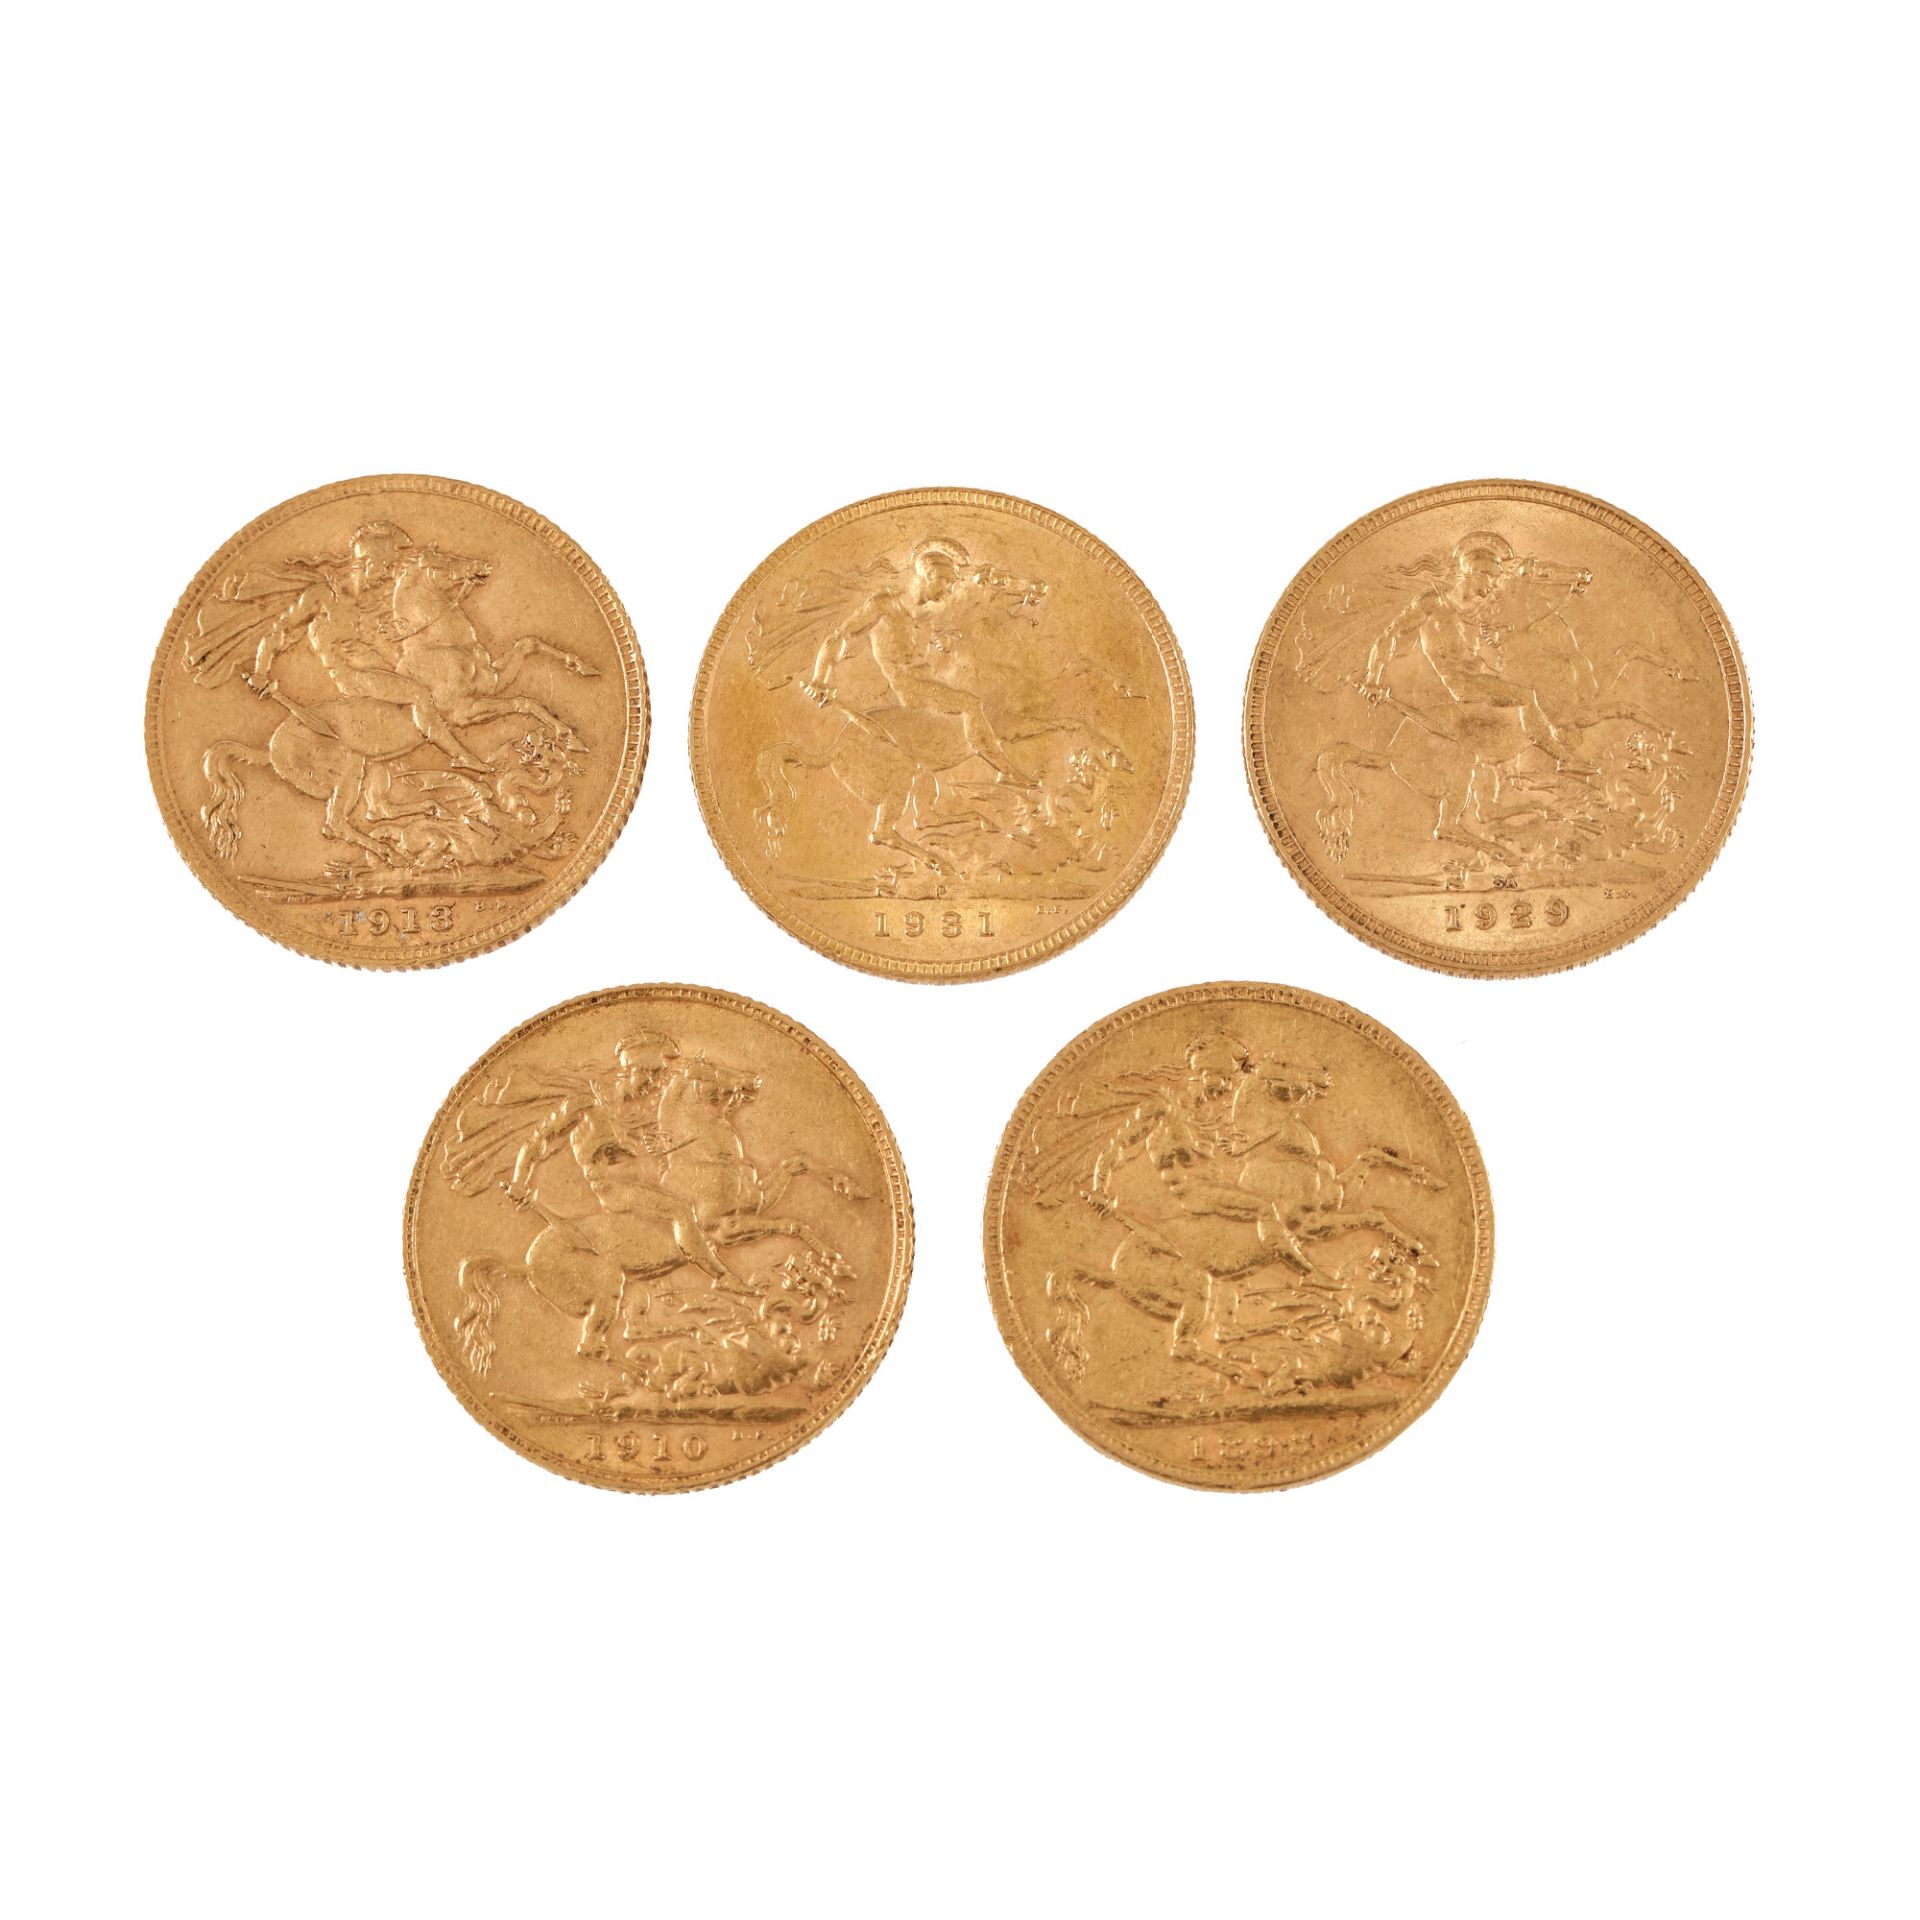 Lot of five Sovereign coins, gold, Great Britain - Image 2 of 2